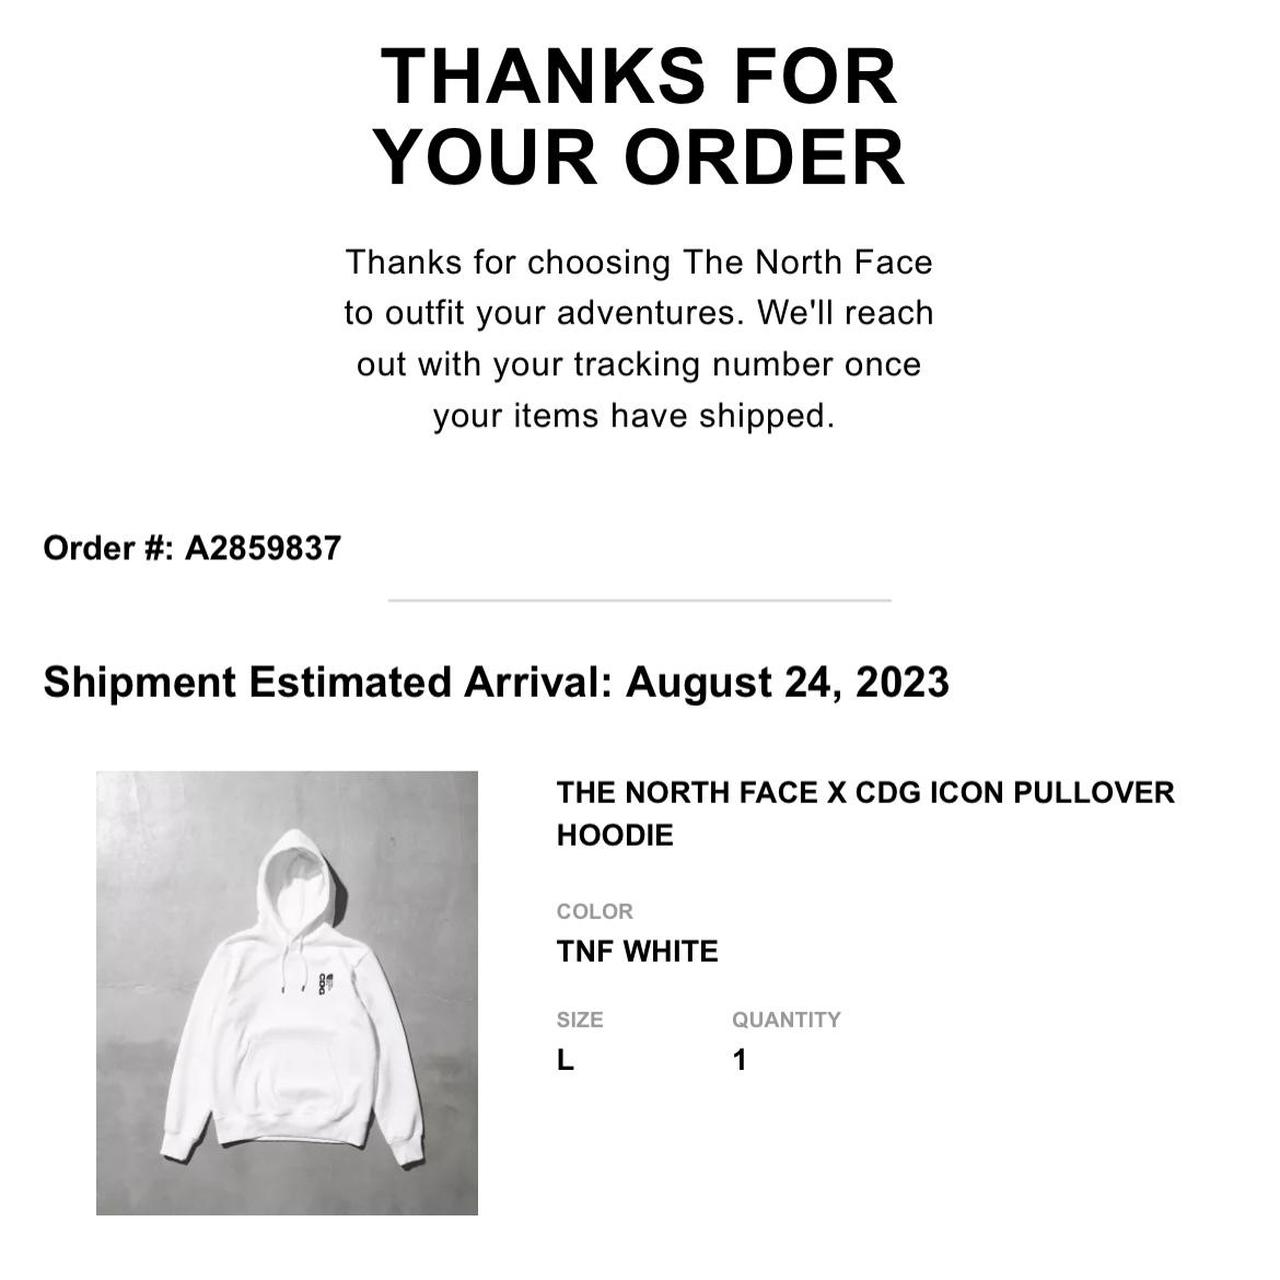 TheNoThe North Face CDG Icon Pullover Hoodie